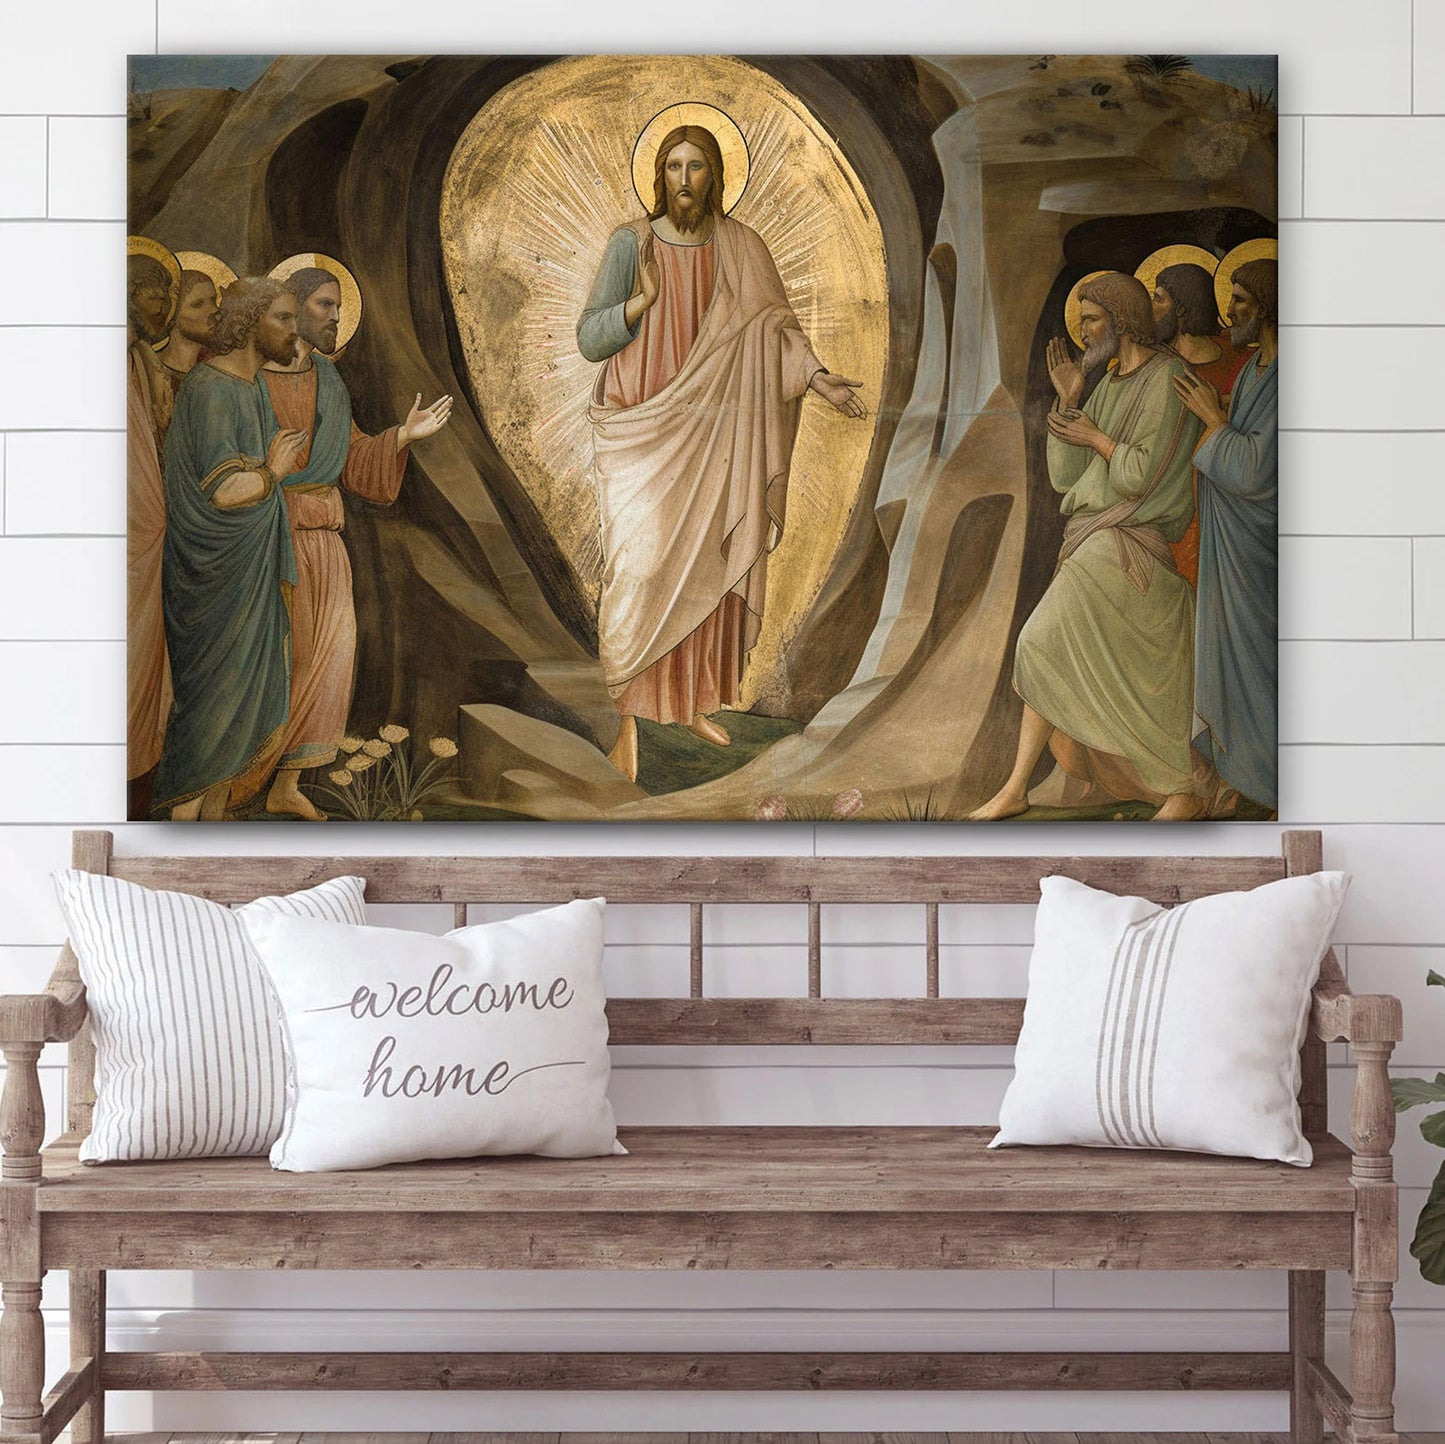 Jesus Christ Risen From The Tomb Art - Canvas Picture - Jesus Canvas Pictures - Christian Wall Art